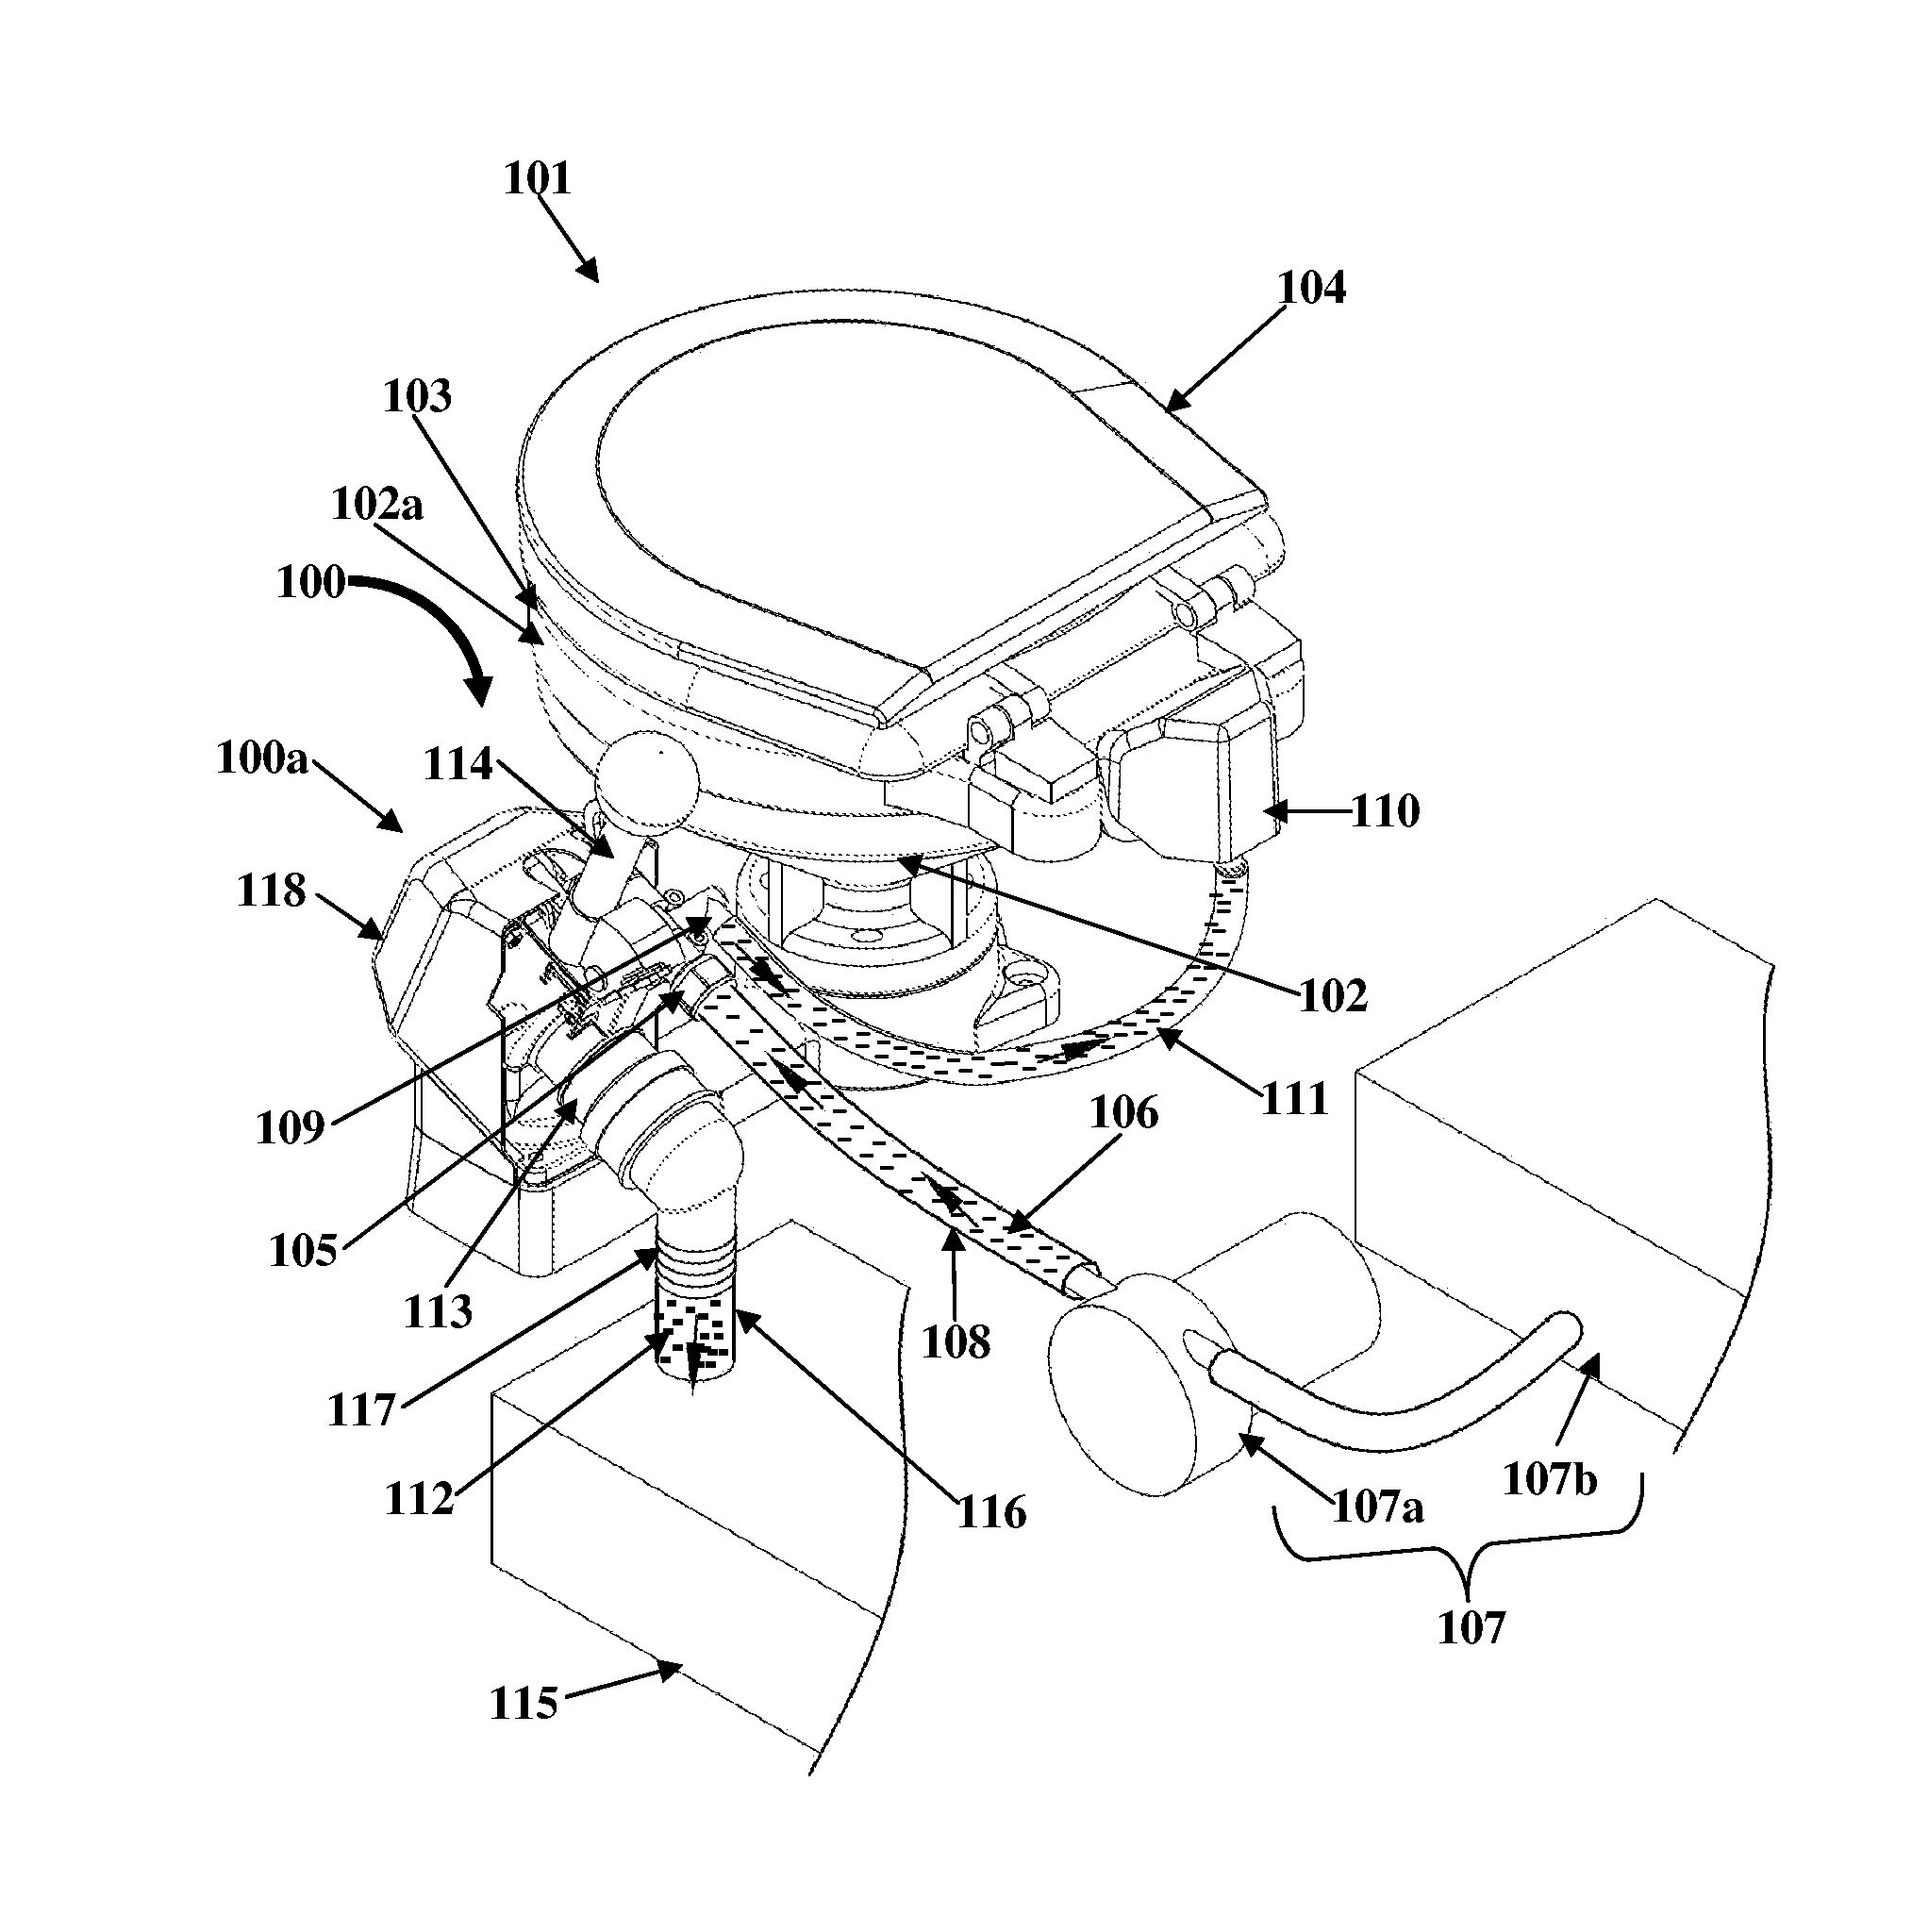 Manual Toilet Flushing Apparatus With An Odor Reducing Fresh Water Inlet Valve Assembly